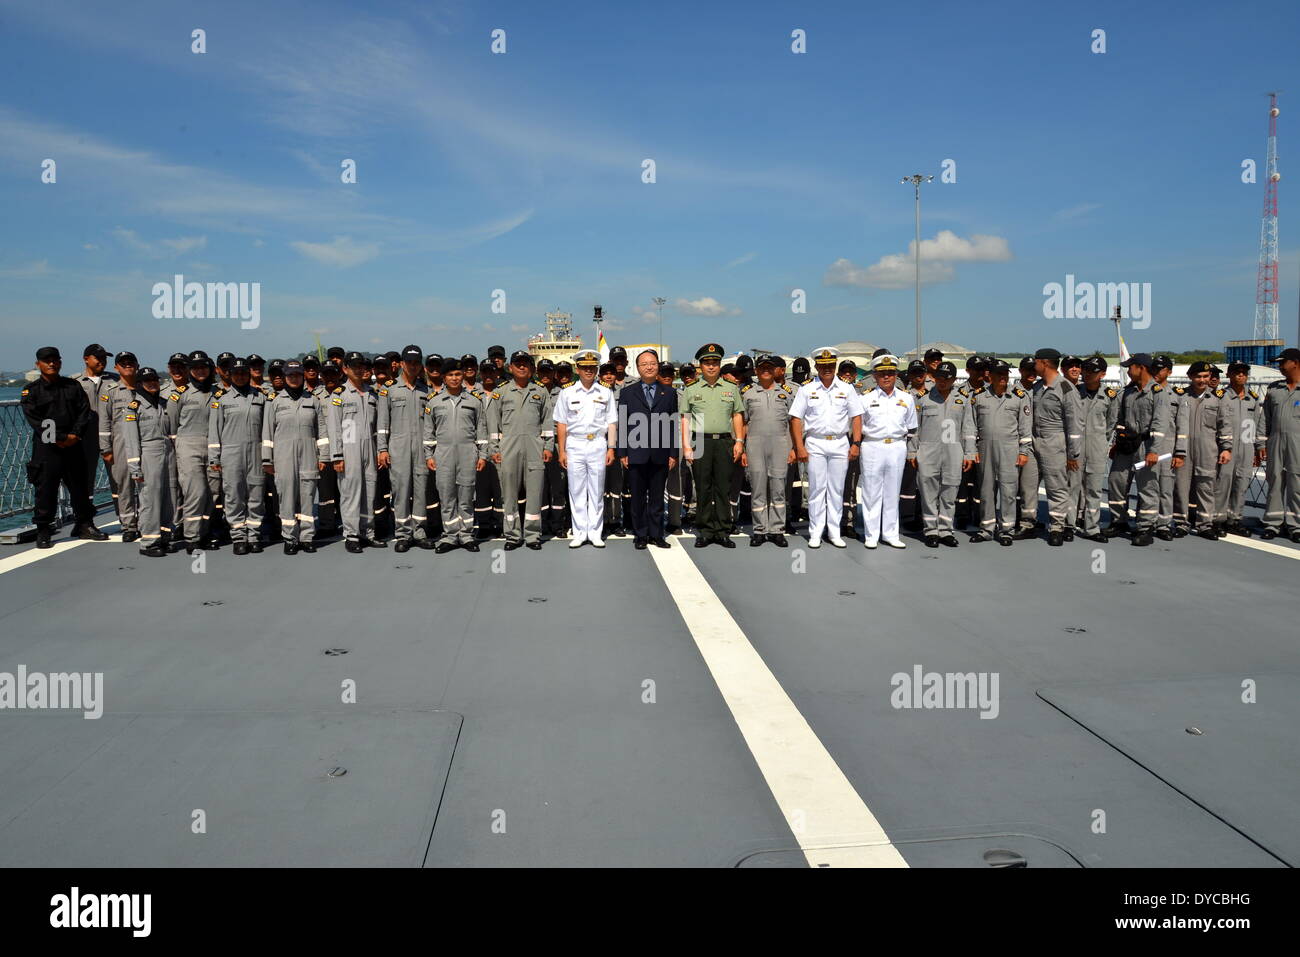 Muara Port, Brunei. 14th Apr, 2014. Officers pose for photos on a Royal Brunei Navy vessel in Muara Port, Brunei, April 14, 2014. A total crew of 69 Royal Brunei Navy (RBN) personnel including attachments set sail on their vessel KDB DARULEHSAN on Monday to attend the Western Pacific Naval Symposium and join the Multilateral Maritime Exercise (MMEx) to be held in Qingdao, a port city in China's Shandong province. © Zheng Jie/Xinhua/Alamy Live News Stock Photo